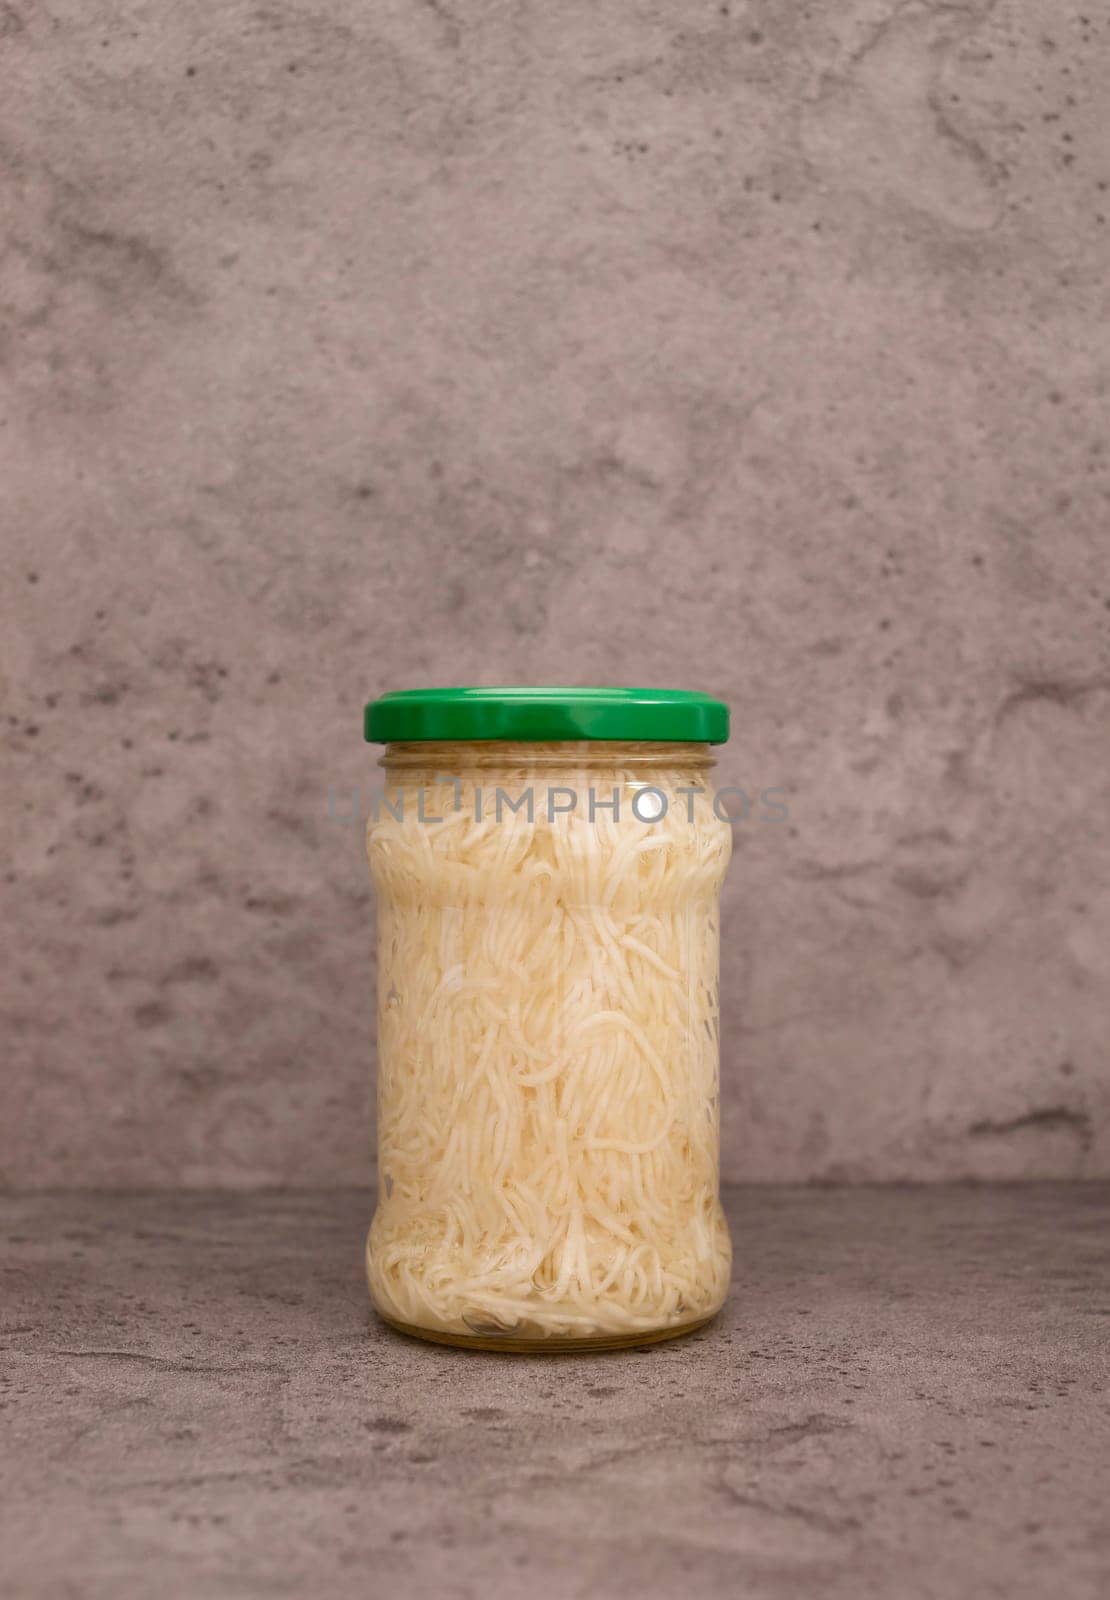 Celery Root Salad Preserve In Glass Jar With Screw Metal Cap On Shelf. Shredded And Pickled Celery Crops, Tuber. Apium Graveolens, Culinary. Vitamins C, K, A, E, PP, B. Copy Space, Vertical Plane.